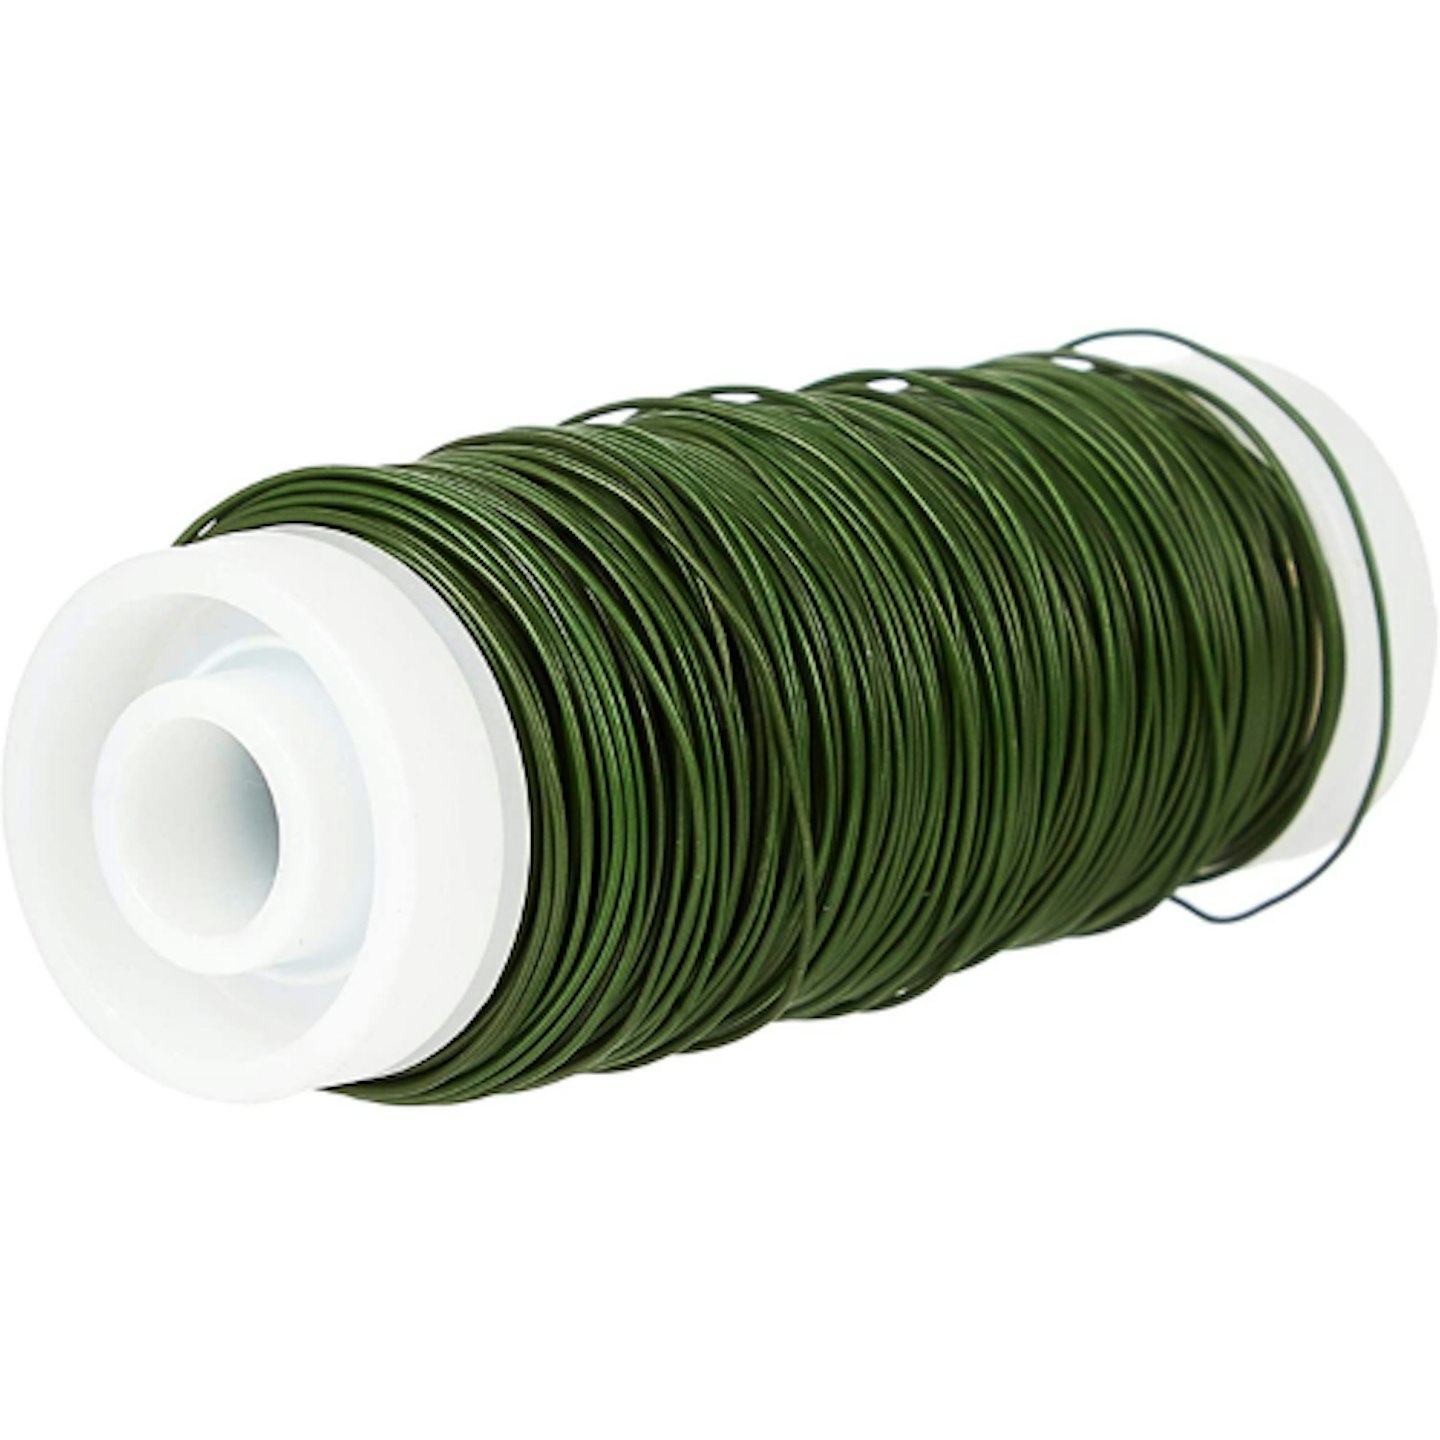 Efco 0.35 mm/ 50 g Green Florists Wire